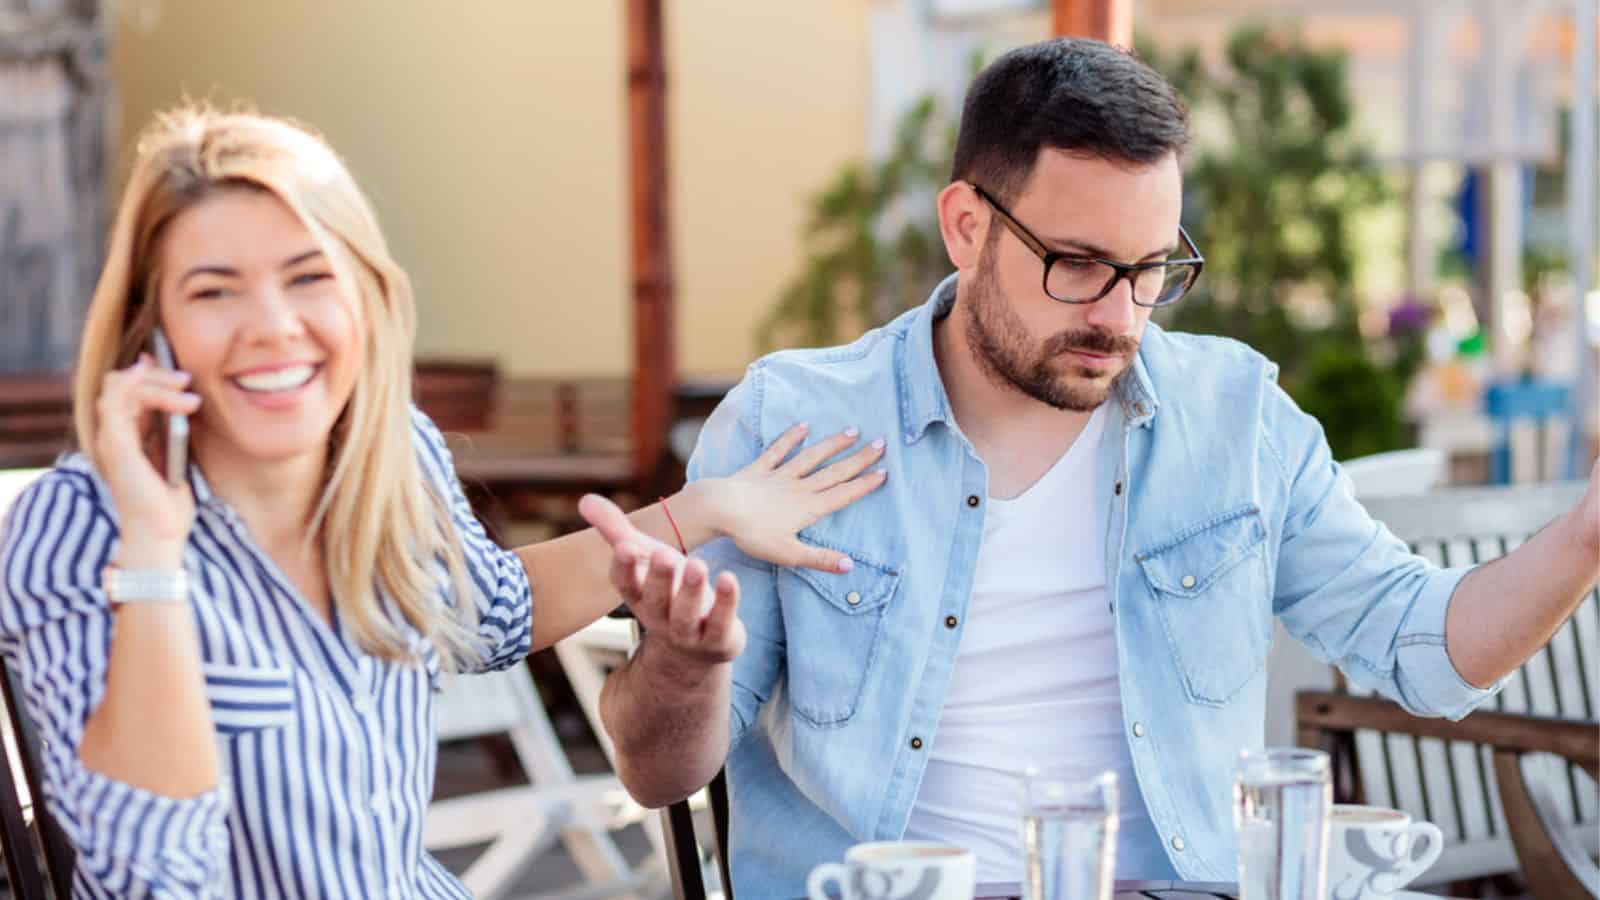 Man is annoyed as his girlfriend spends too much time talking on the phone